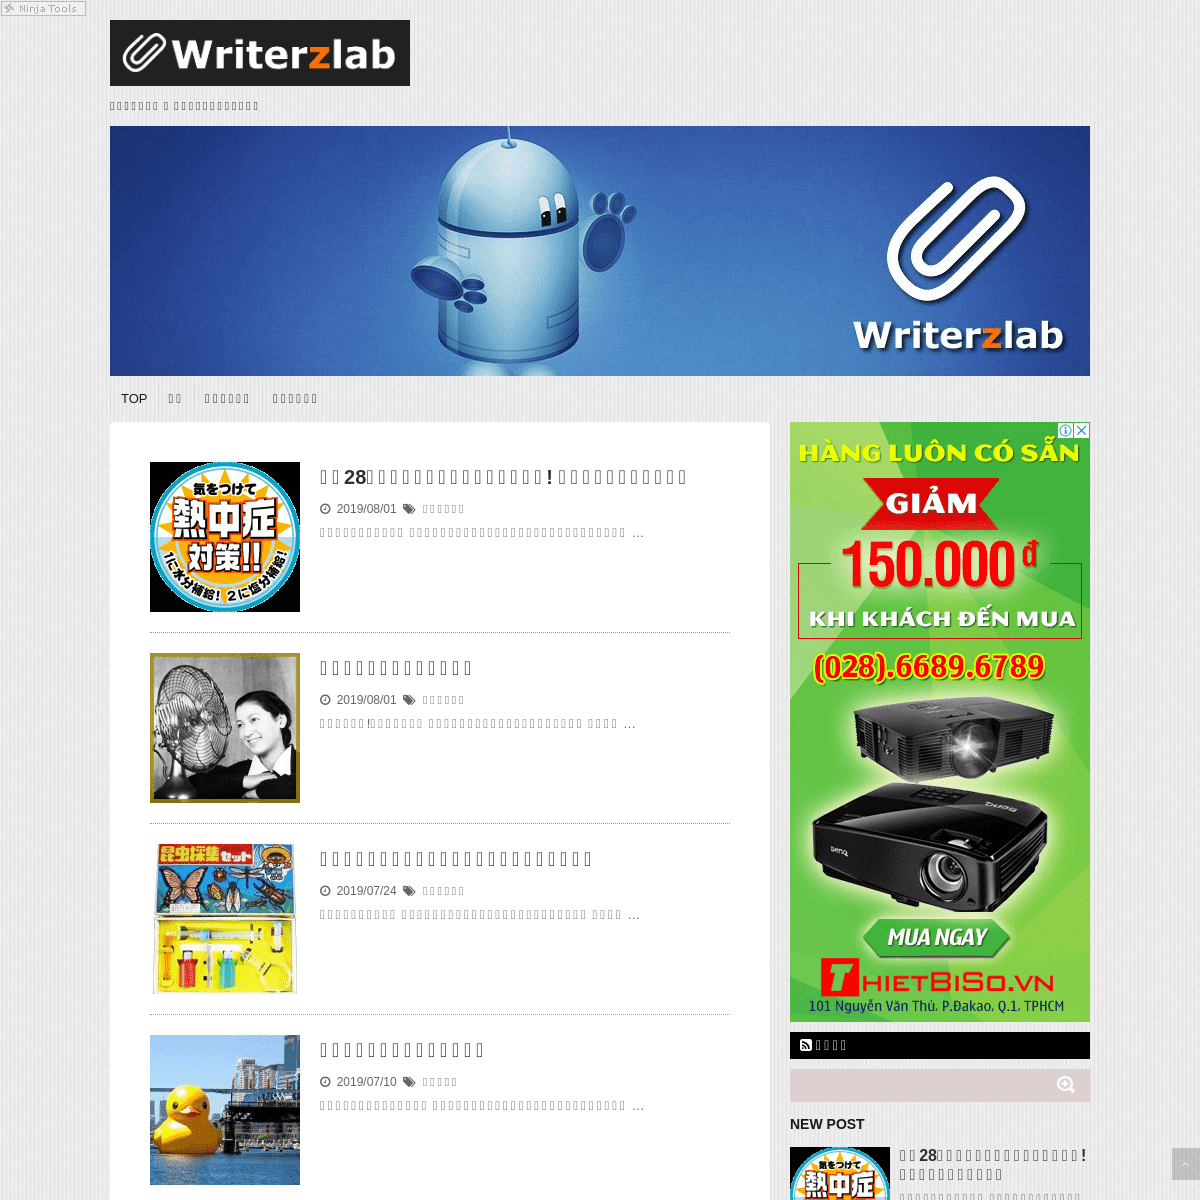 A complete backup of writerzlab.com